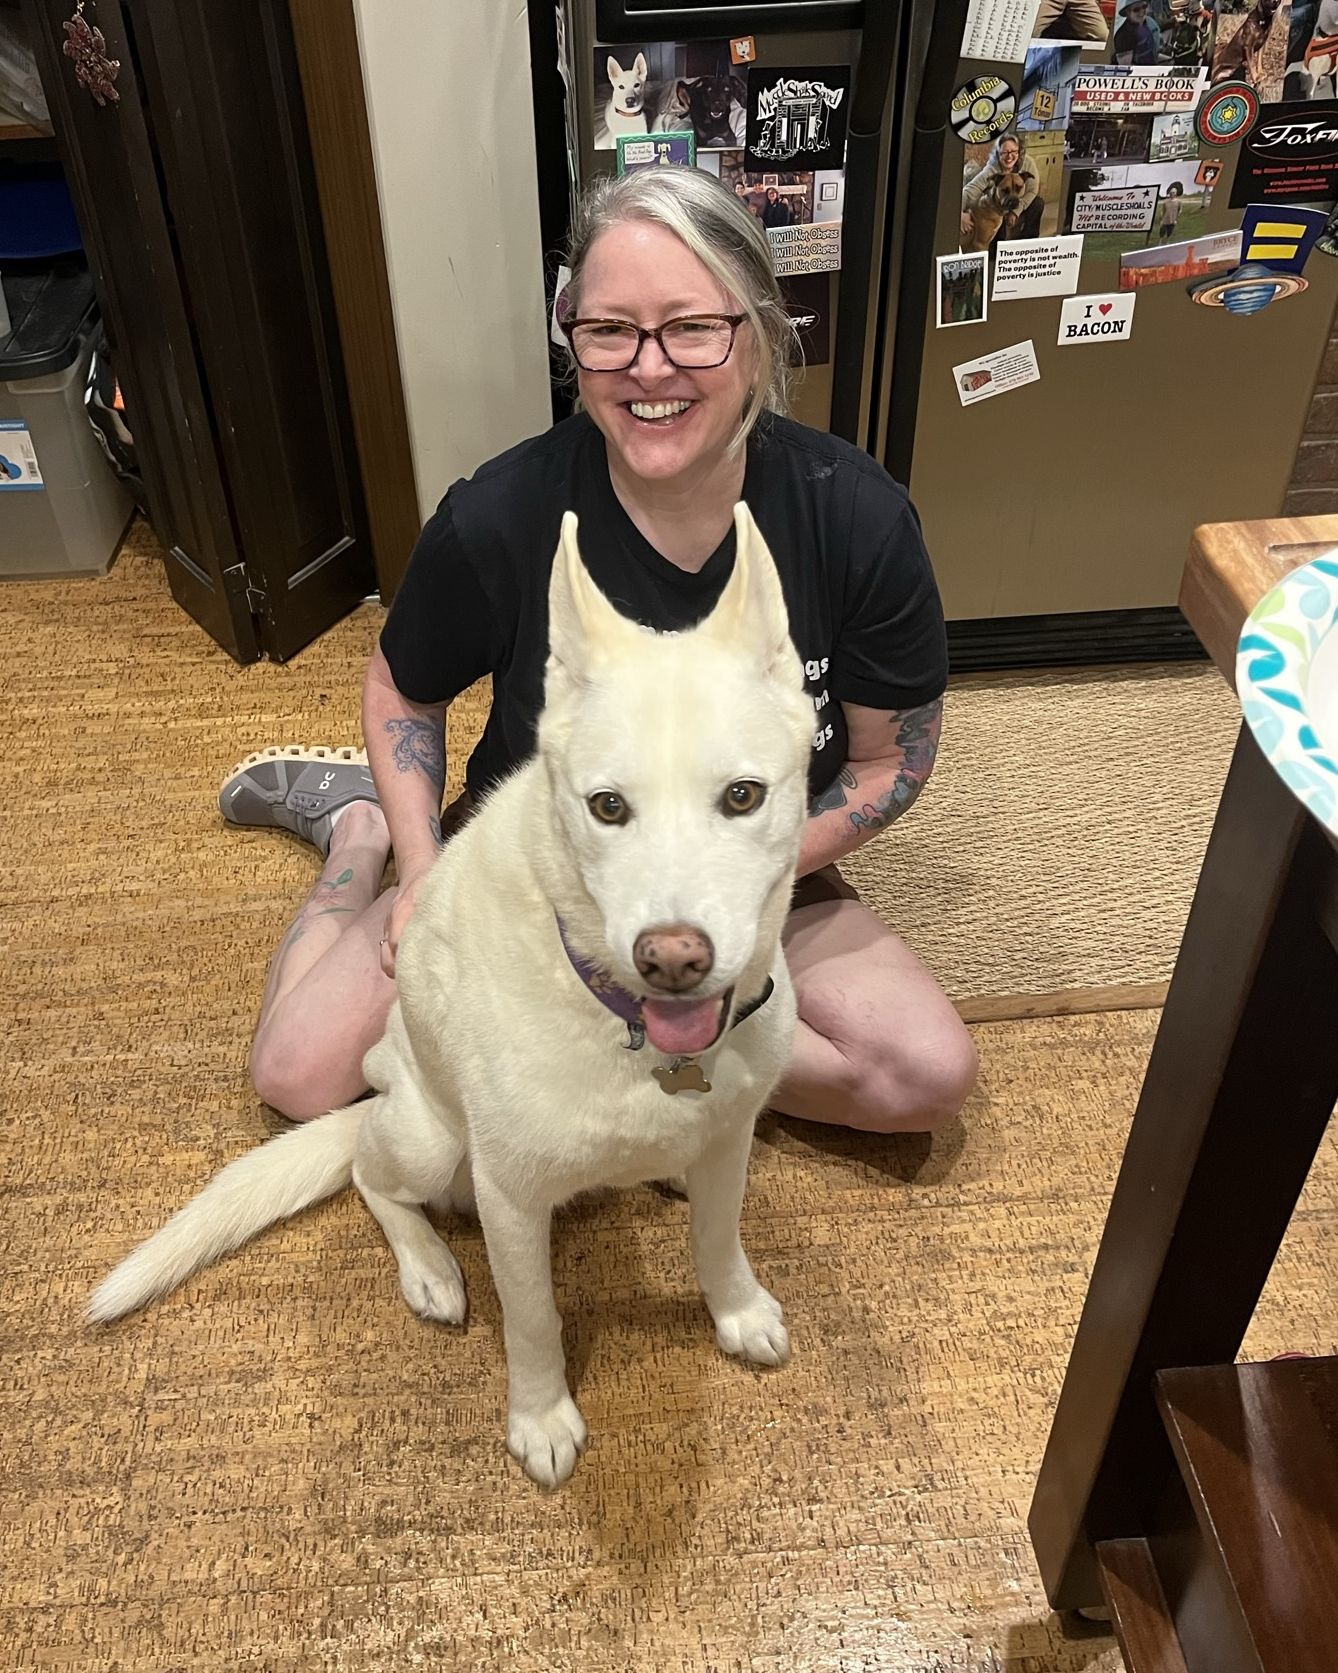 A woman sitting on the floor smiling with a large white dog sitting in front of her.